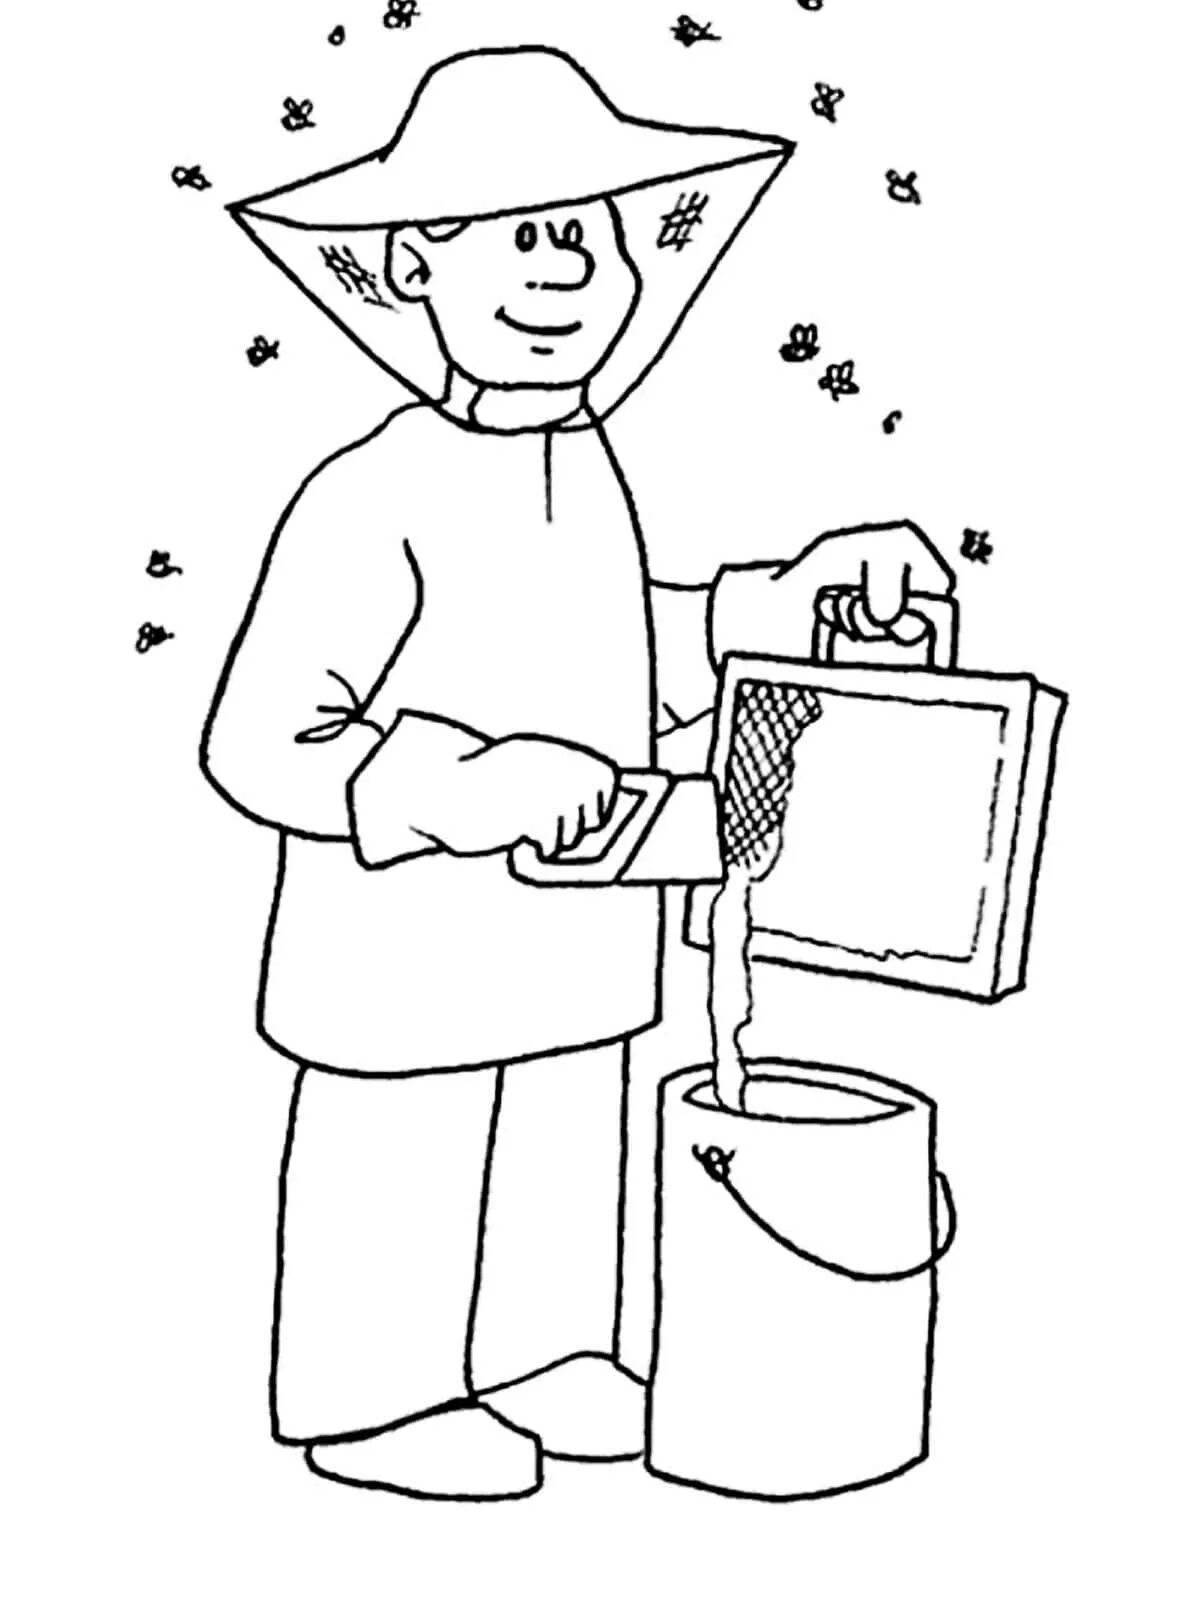 Glowing doctor coloring page